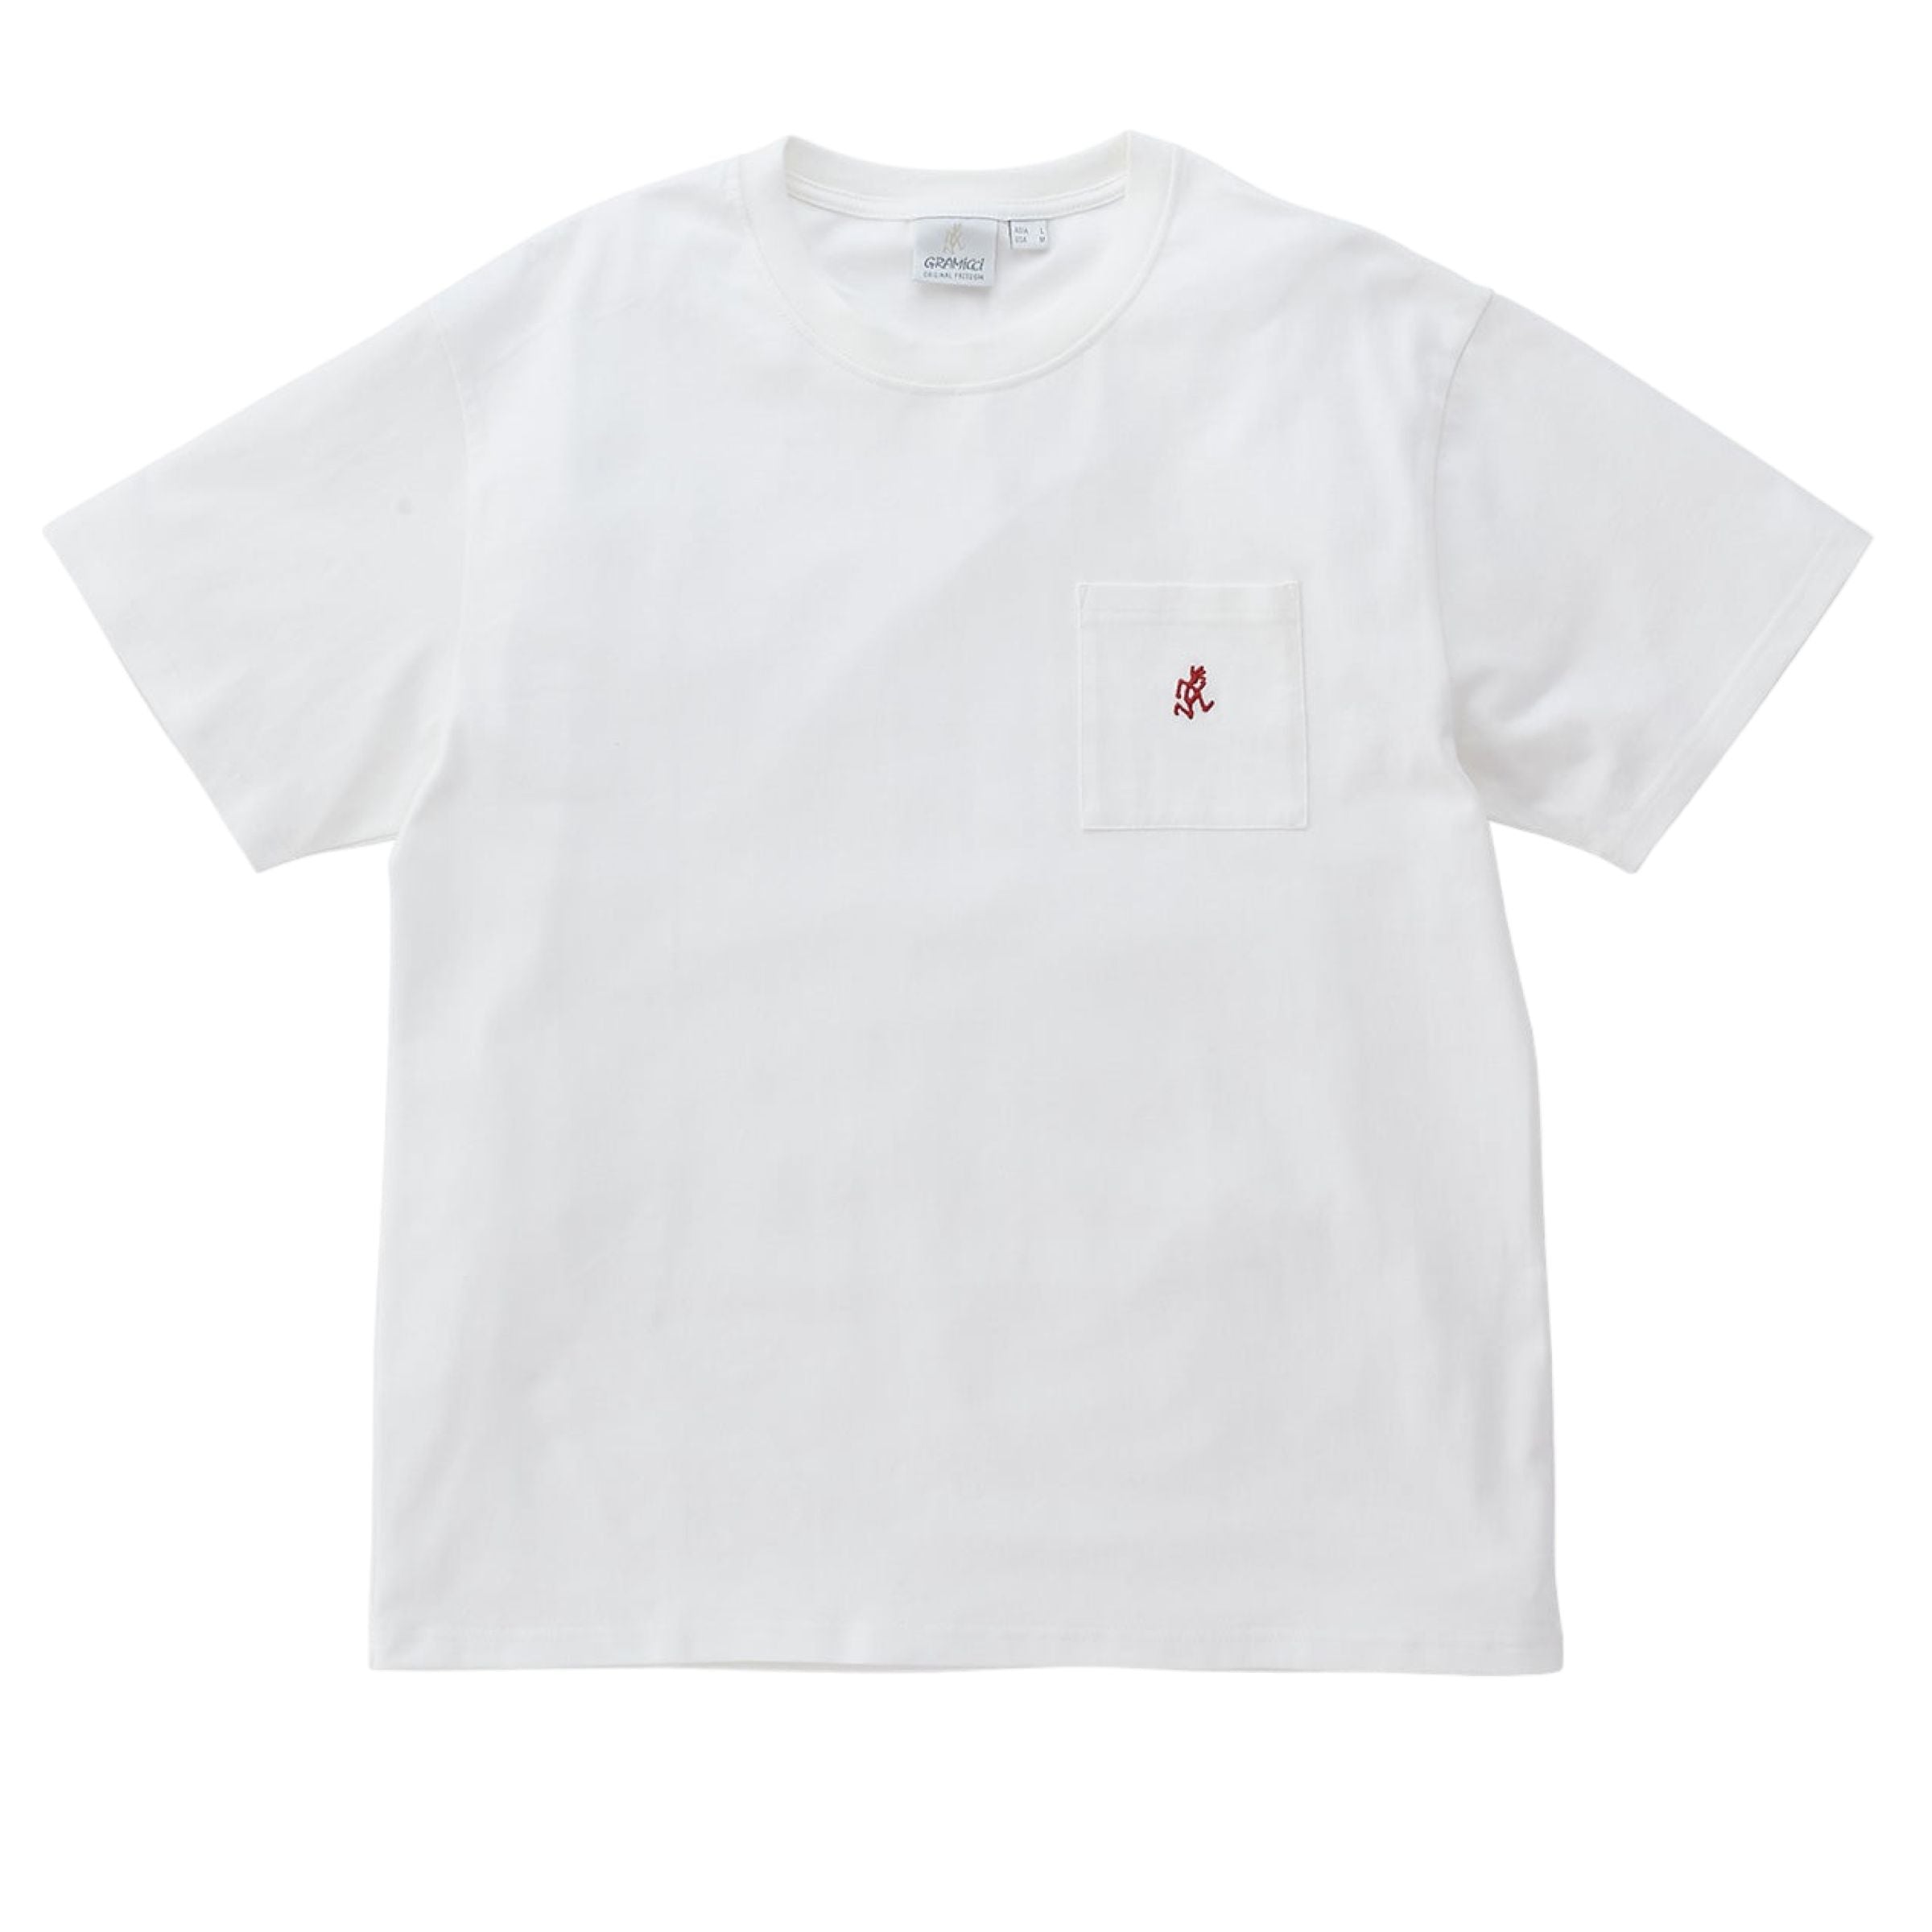 One Point T-shirt White 